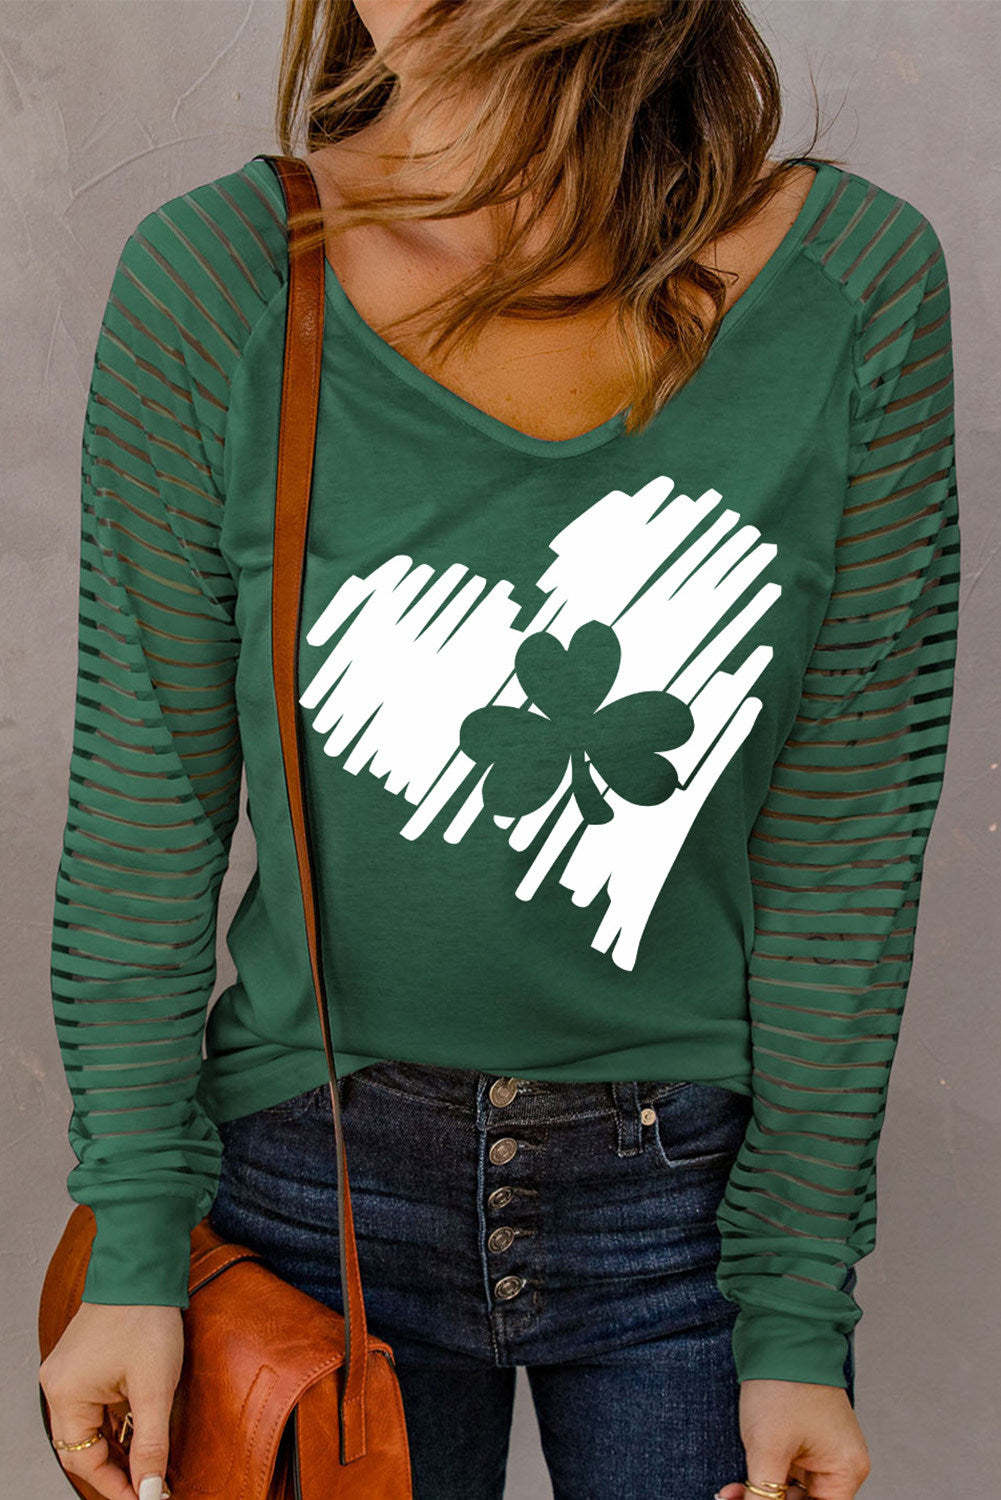 st patricks day shirts for women